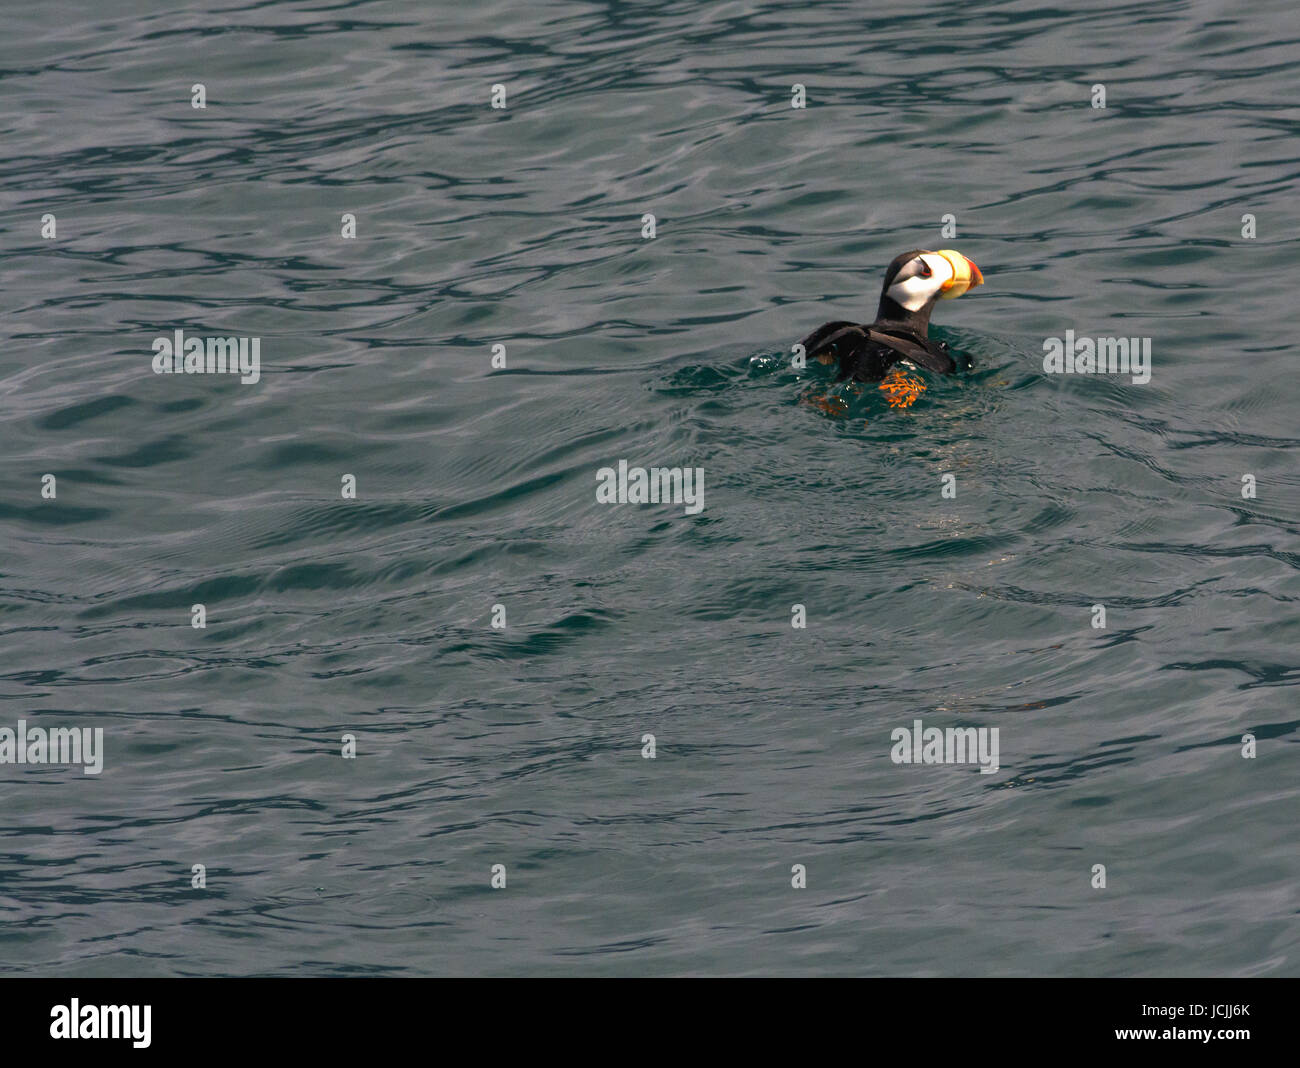 The orange feet of a puffin can be seen as it paddles in a light swell. Stock Photo